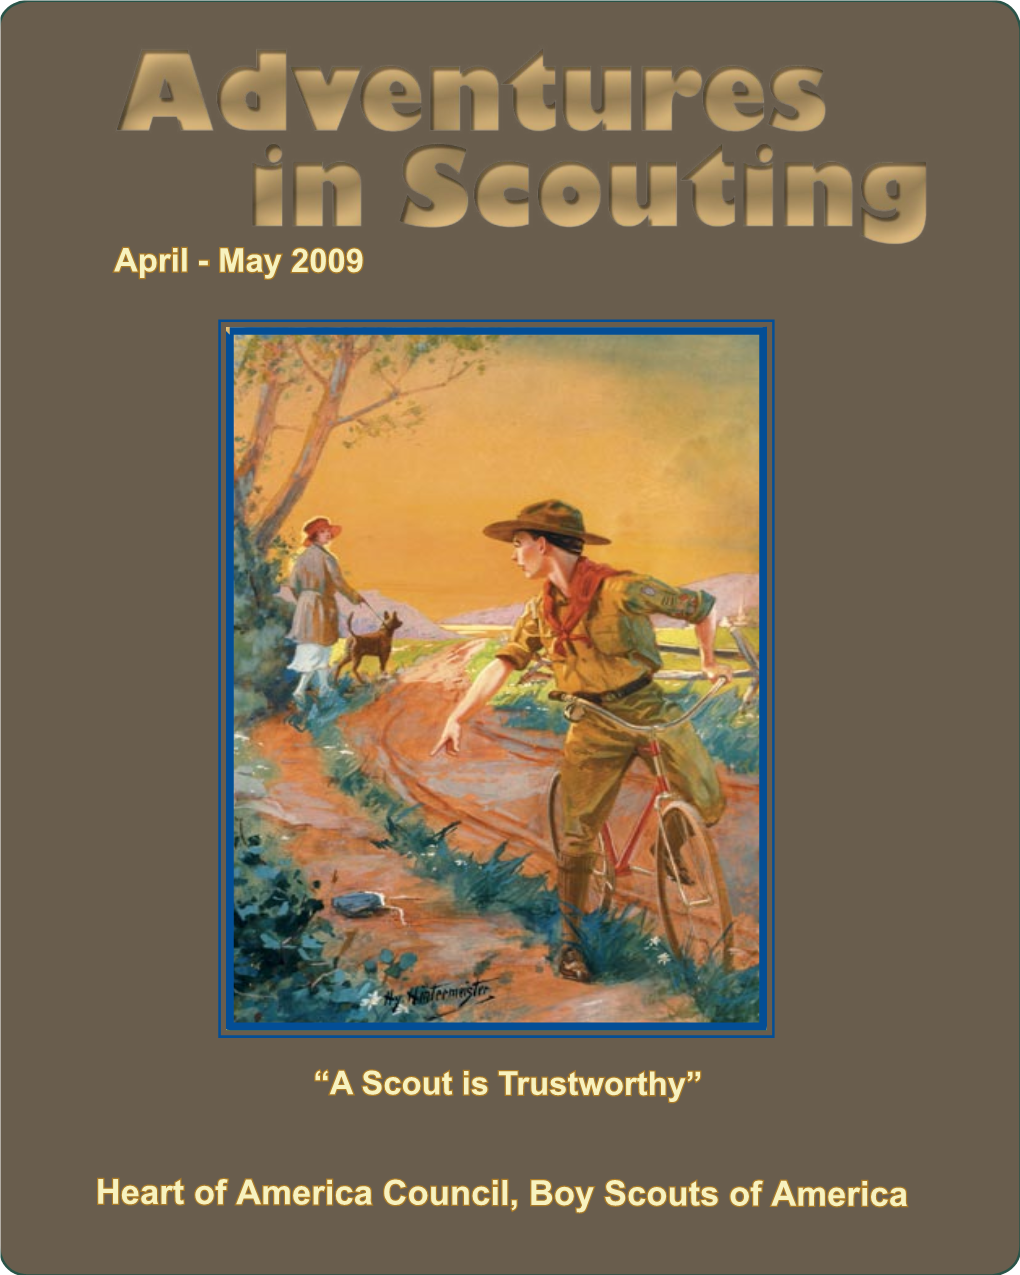 Heart of America Council, Boy Scouts of America Boy Scouts of America 100Th Anniversary Update “Celebrating the Adventure - Continuing the Journey”